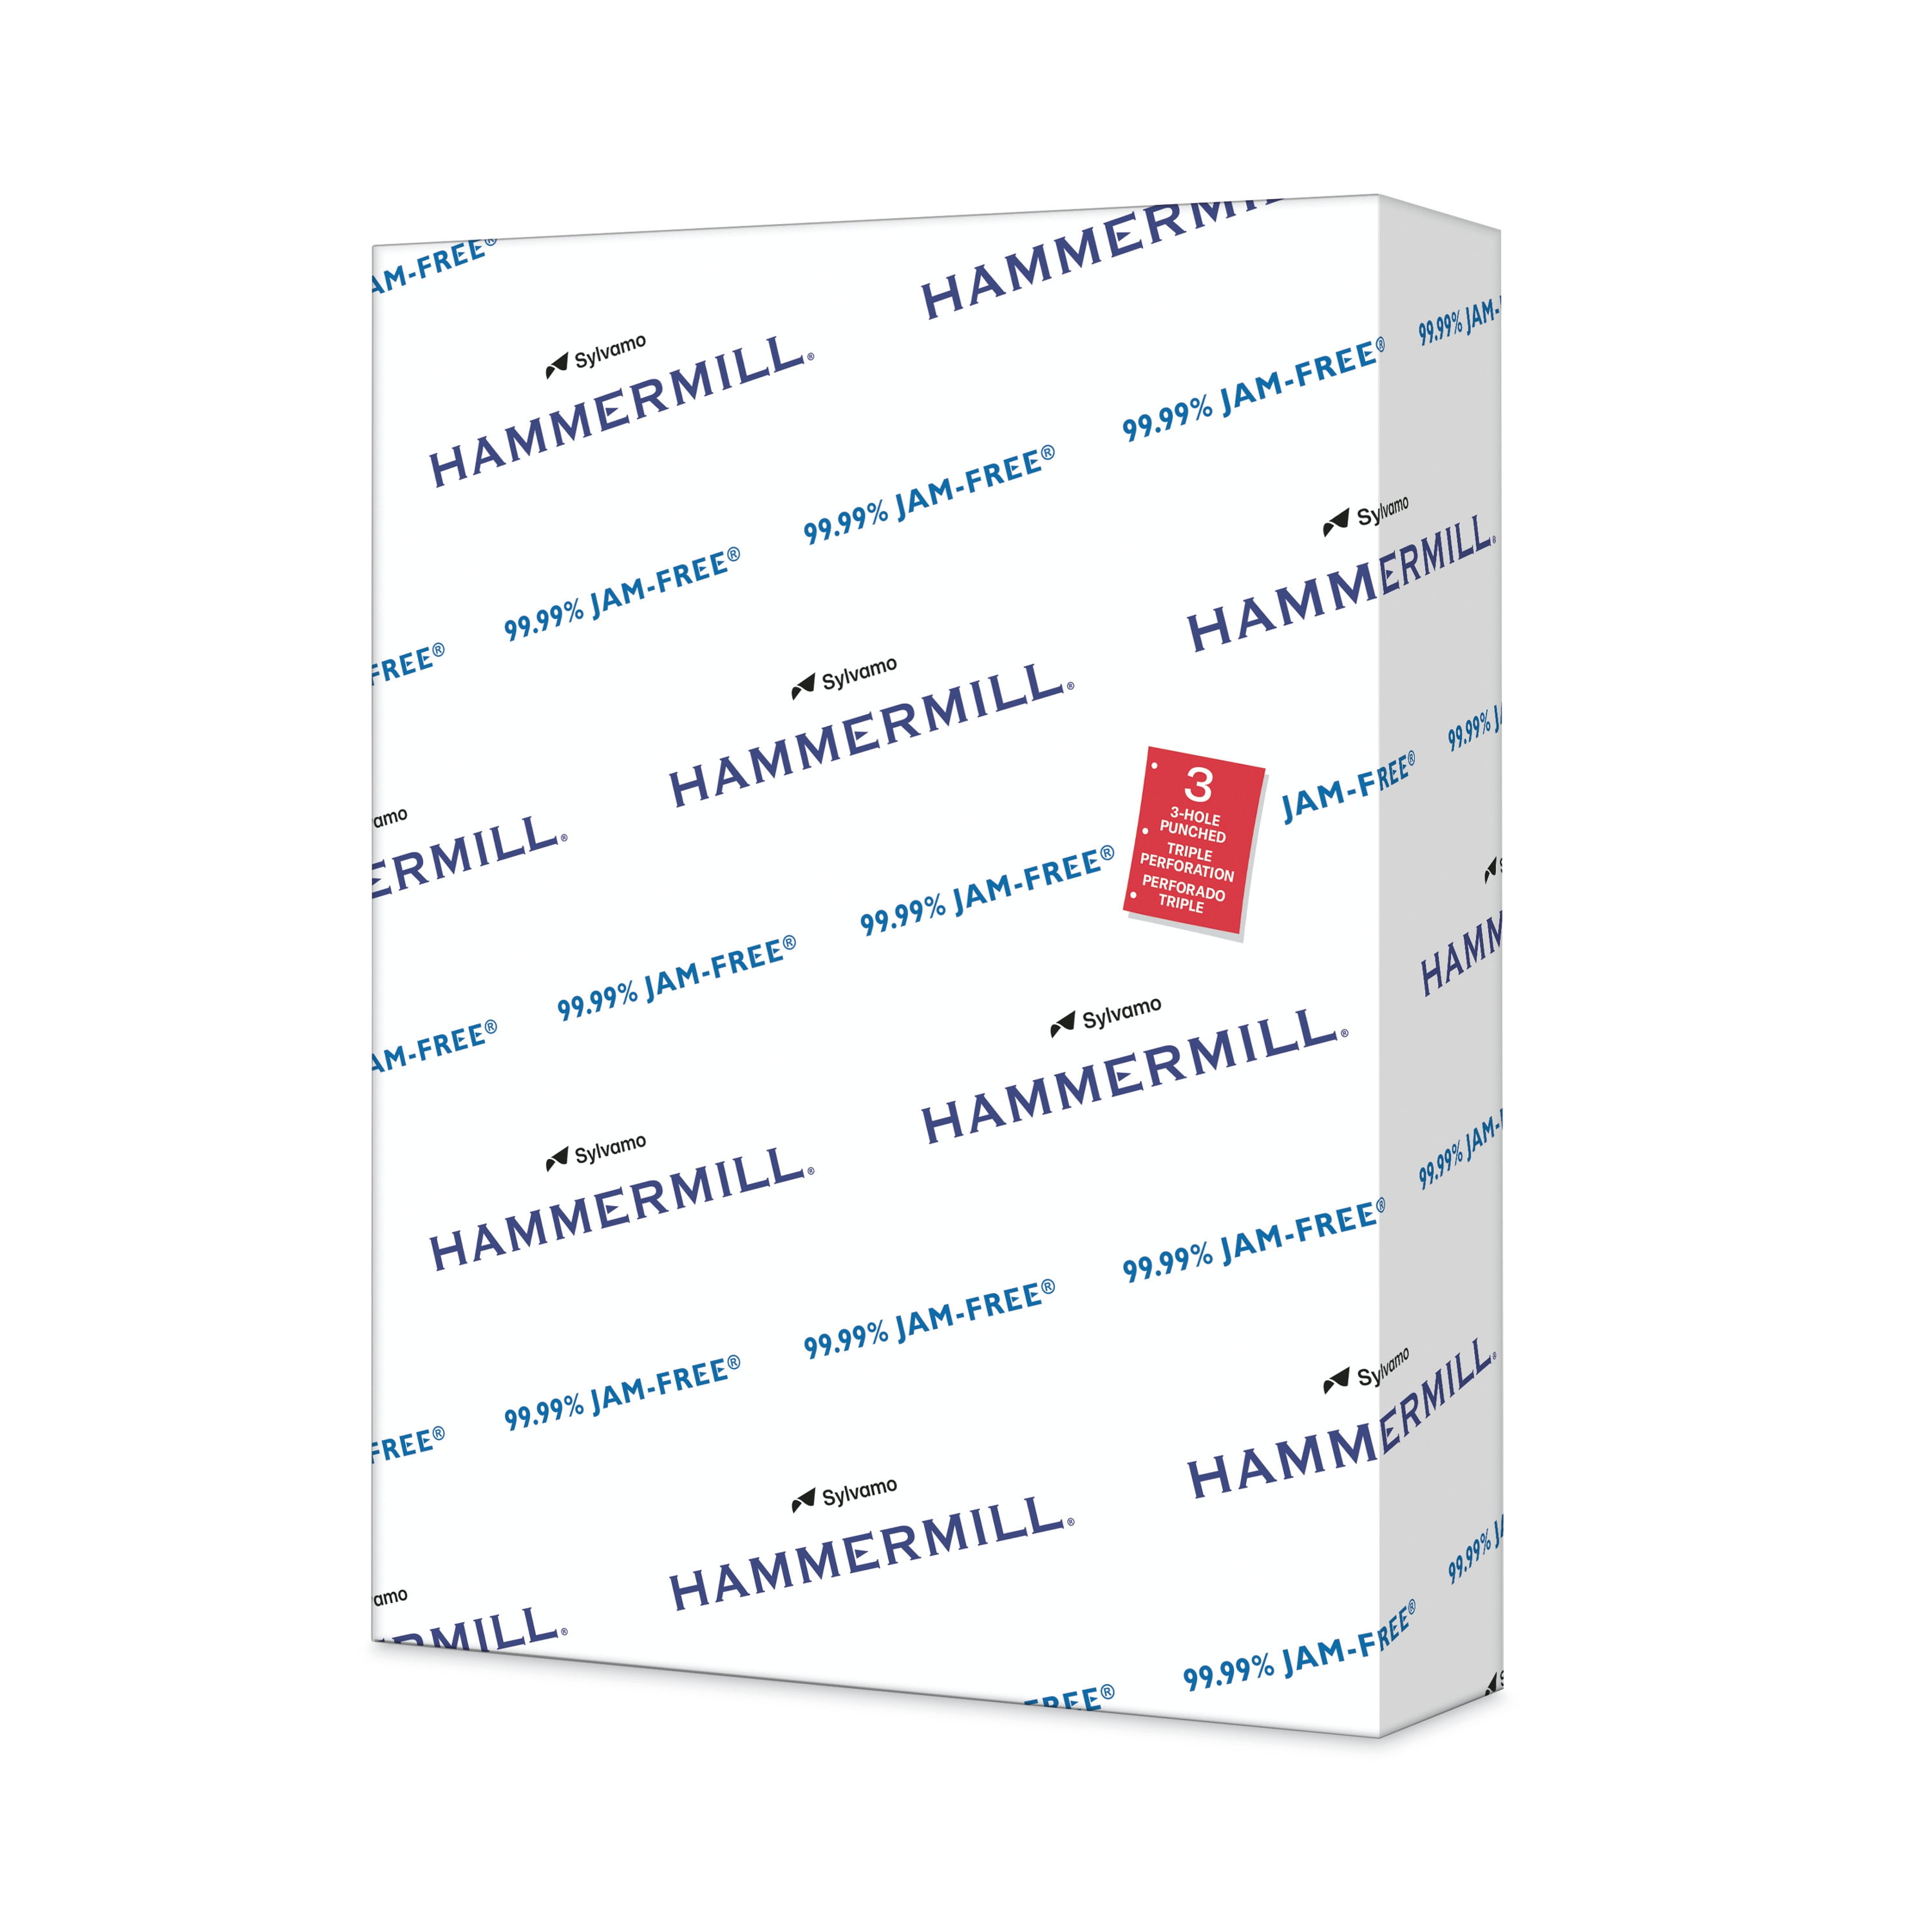 White Regular Copy Paper, 8 1/2 x 11, 3 Hole Punched, 250 Sheets per Pack